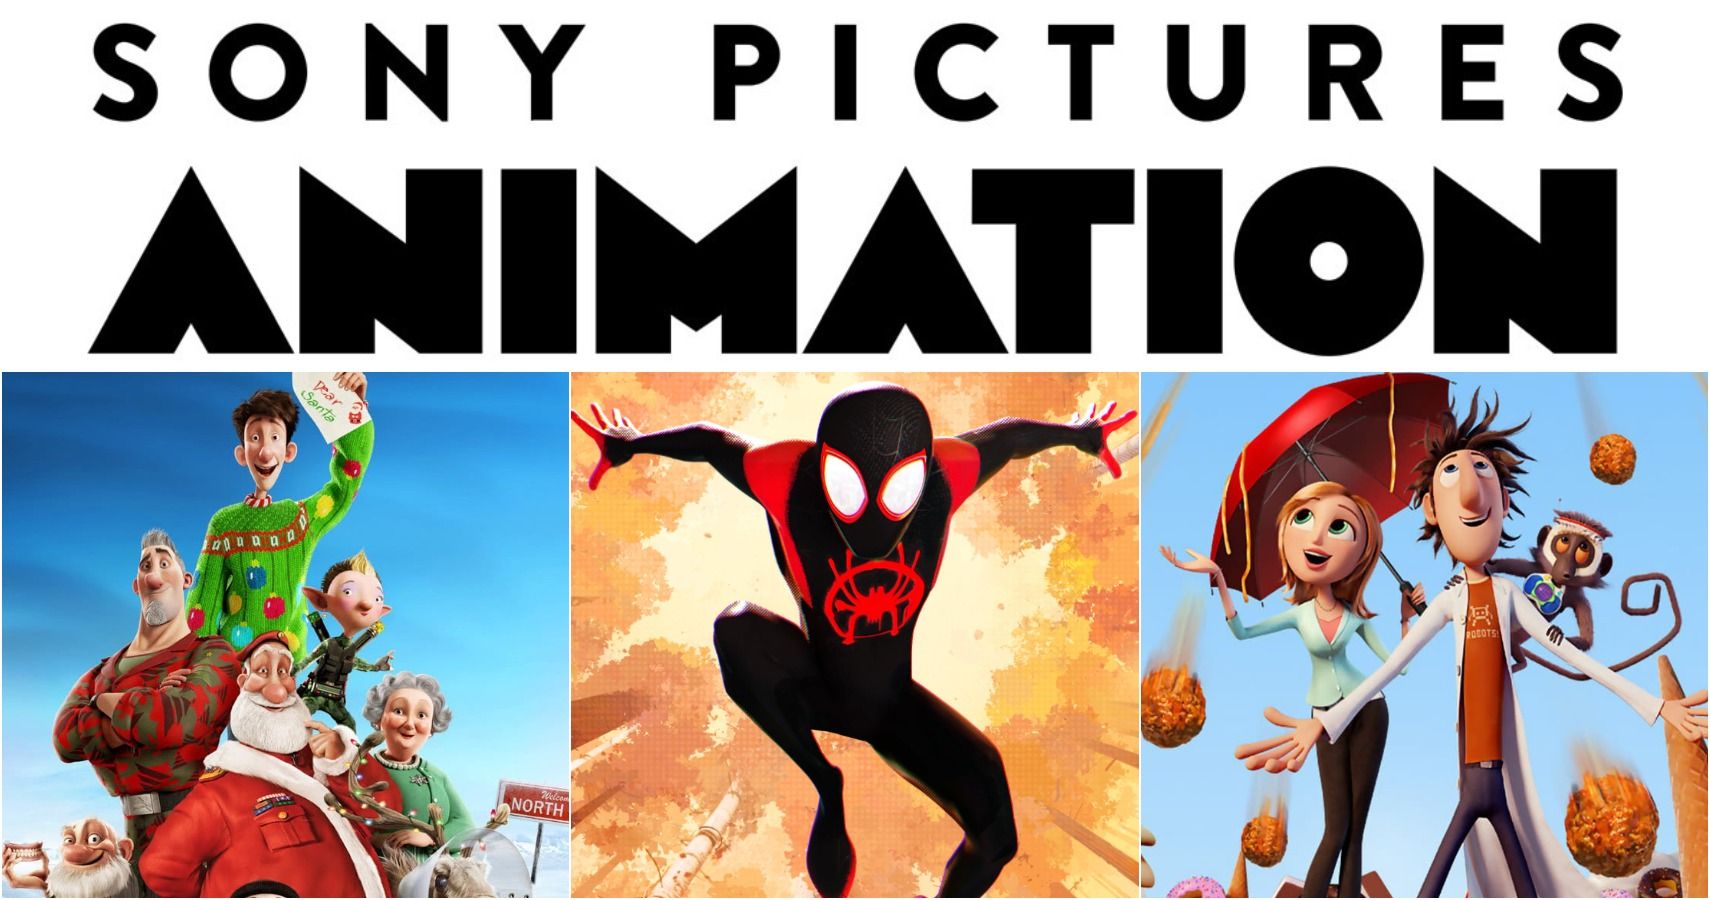 Top 10 Sony Pictures Animation Movies, Ranked (According to Rotten Tomatoes)